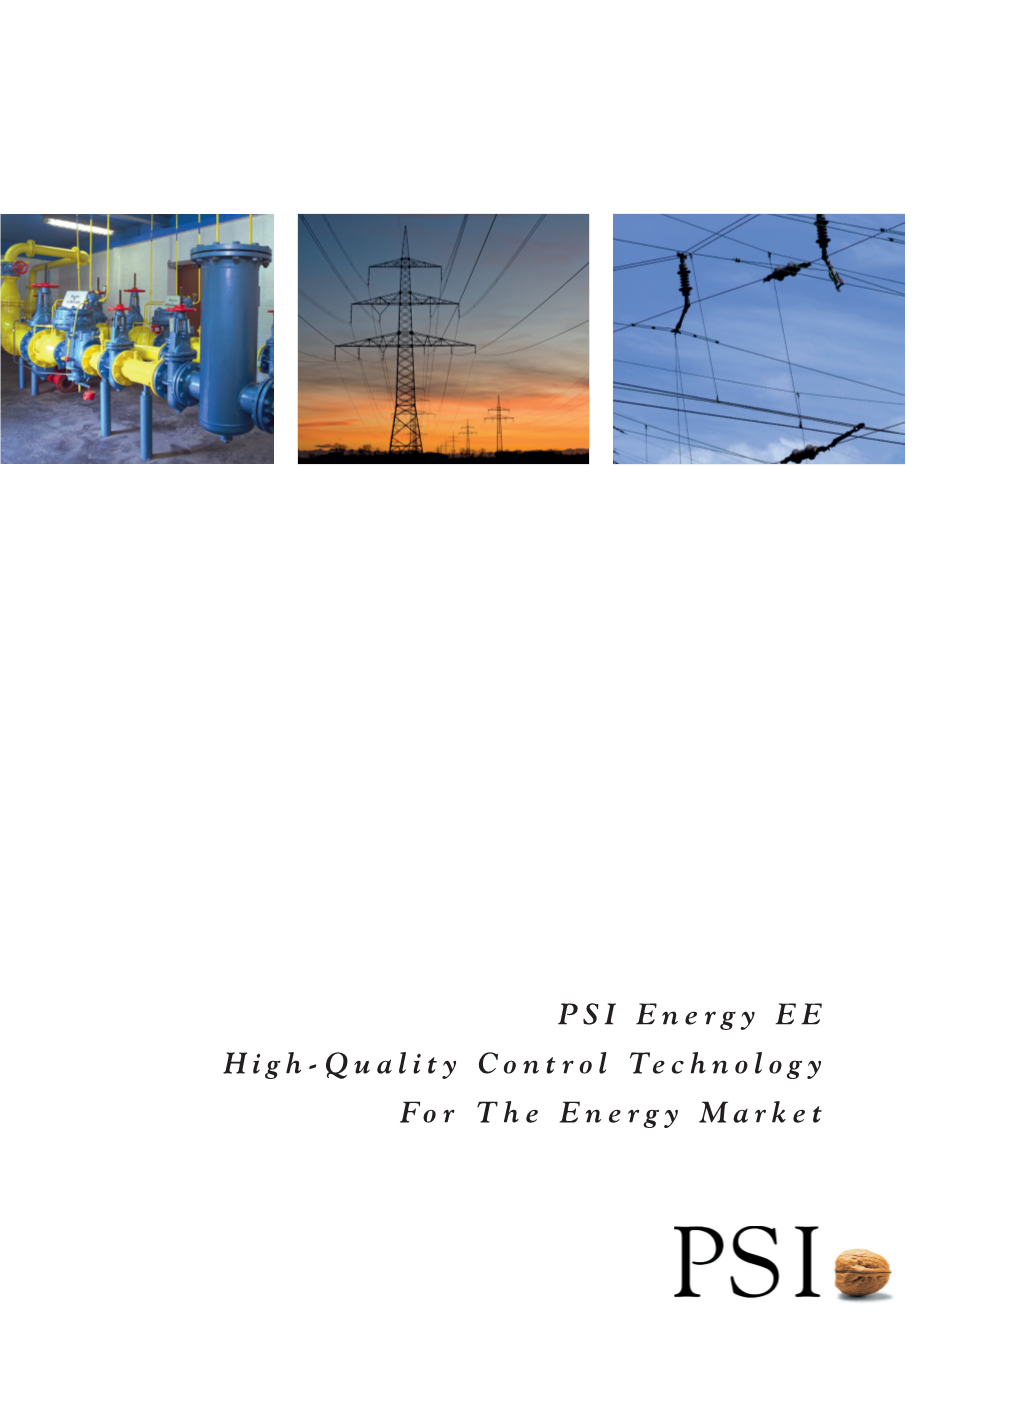 PSI Energy EE High-Quality Control Technology for the Energy Market PSI Energy EE